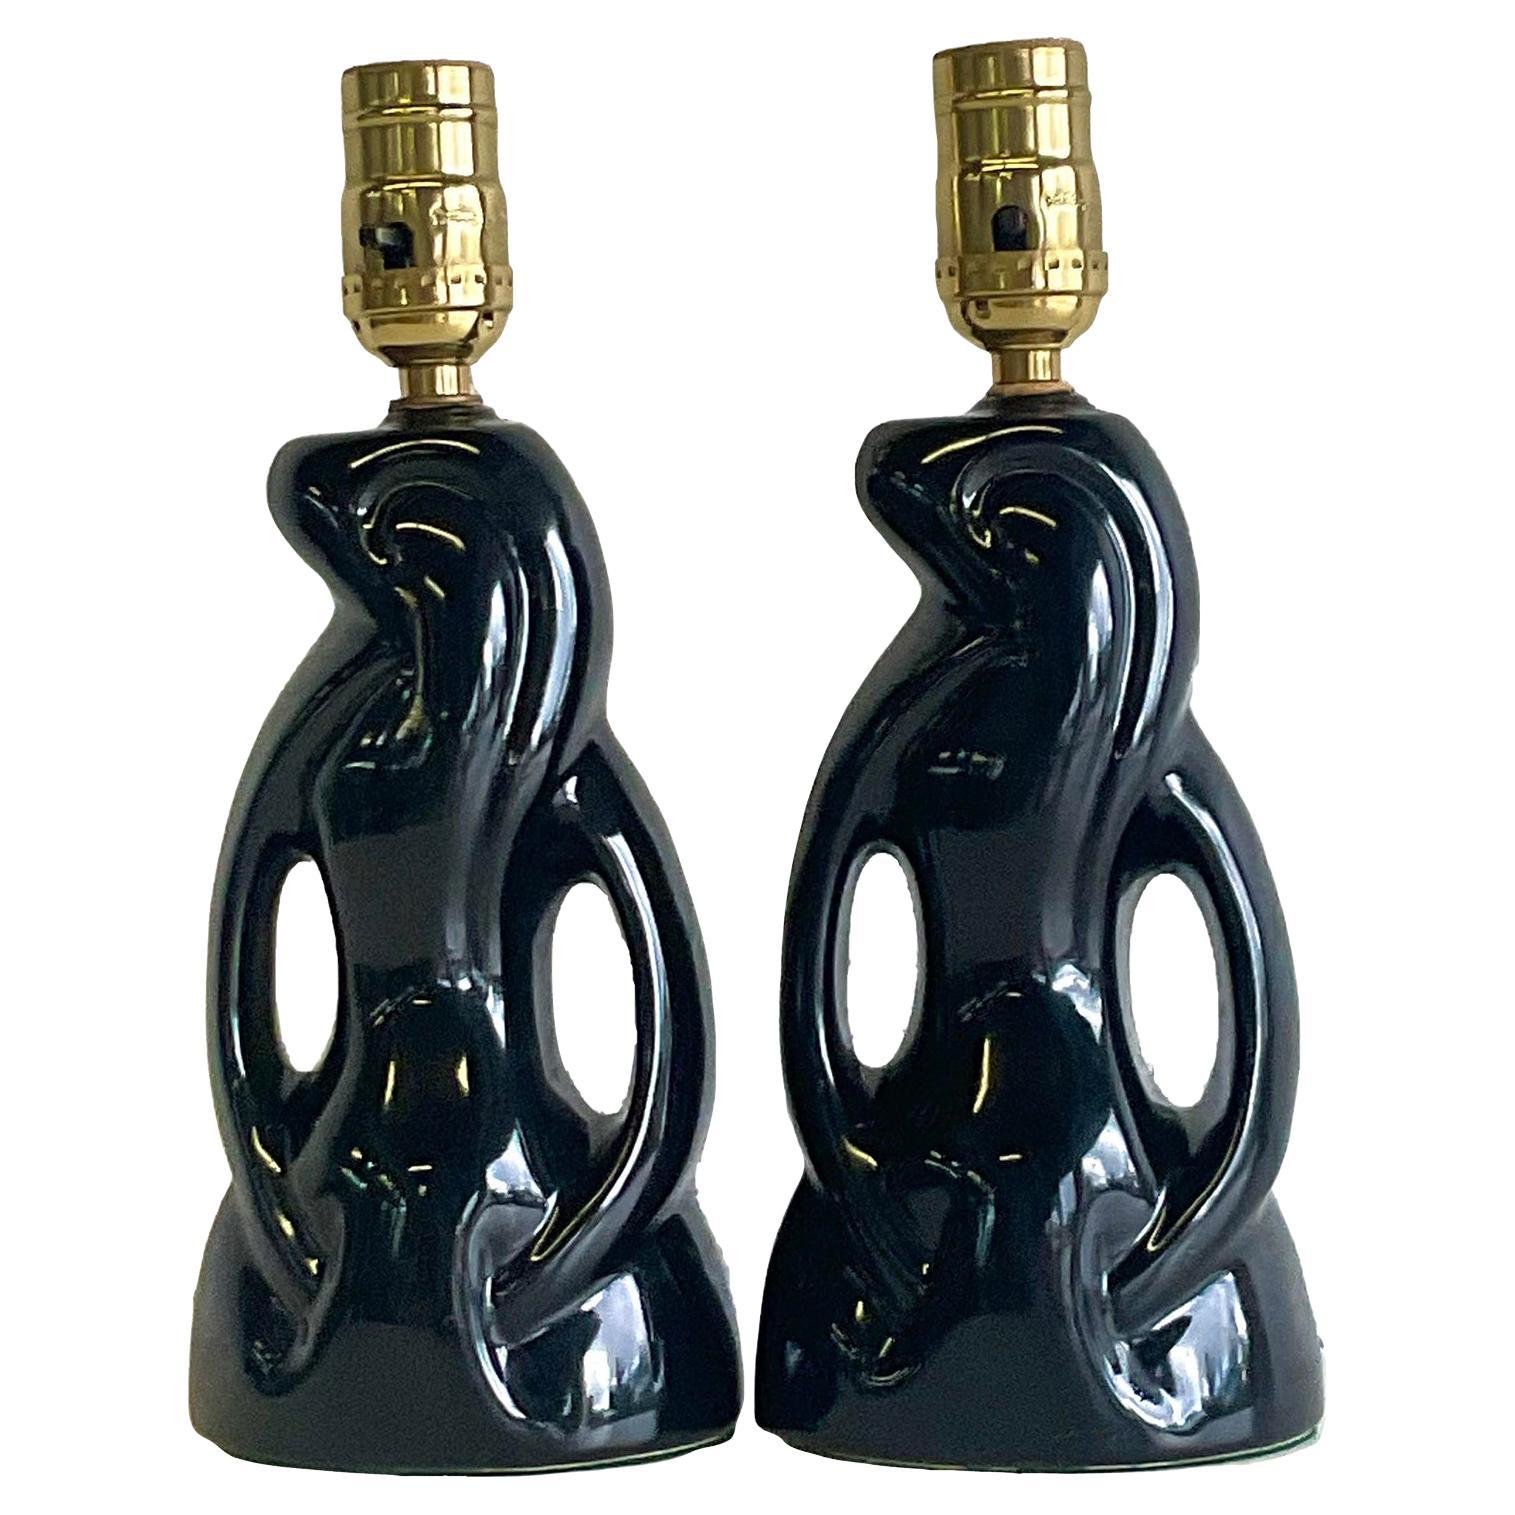 Midcentury Abstract Black Glazed Ceramic Boudoir Lamps - A Pair For Sale